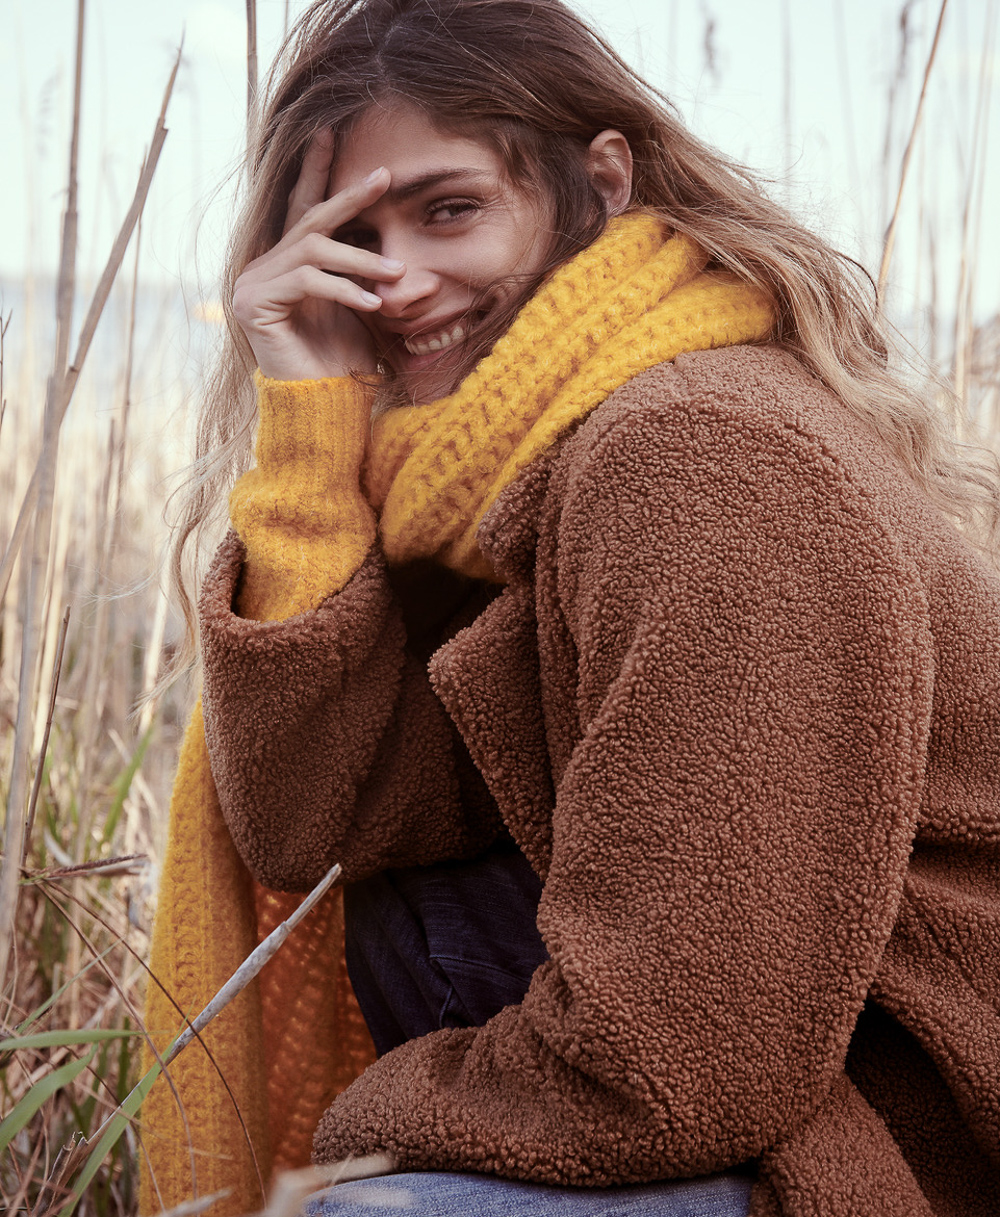 Andreas Ortner for Oui Fashion FW 2019 with Elisa Sednaoui